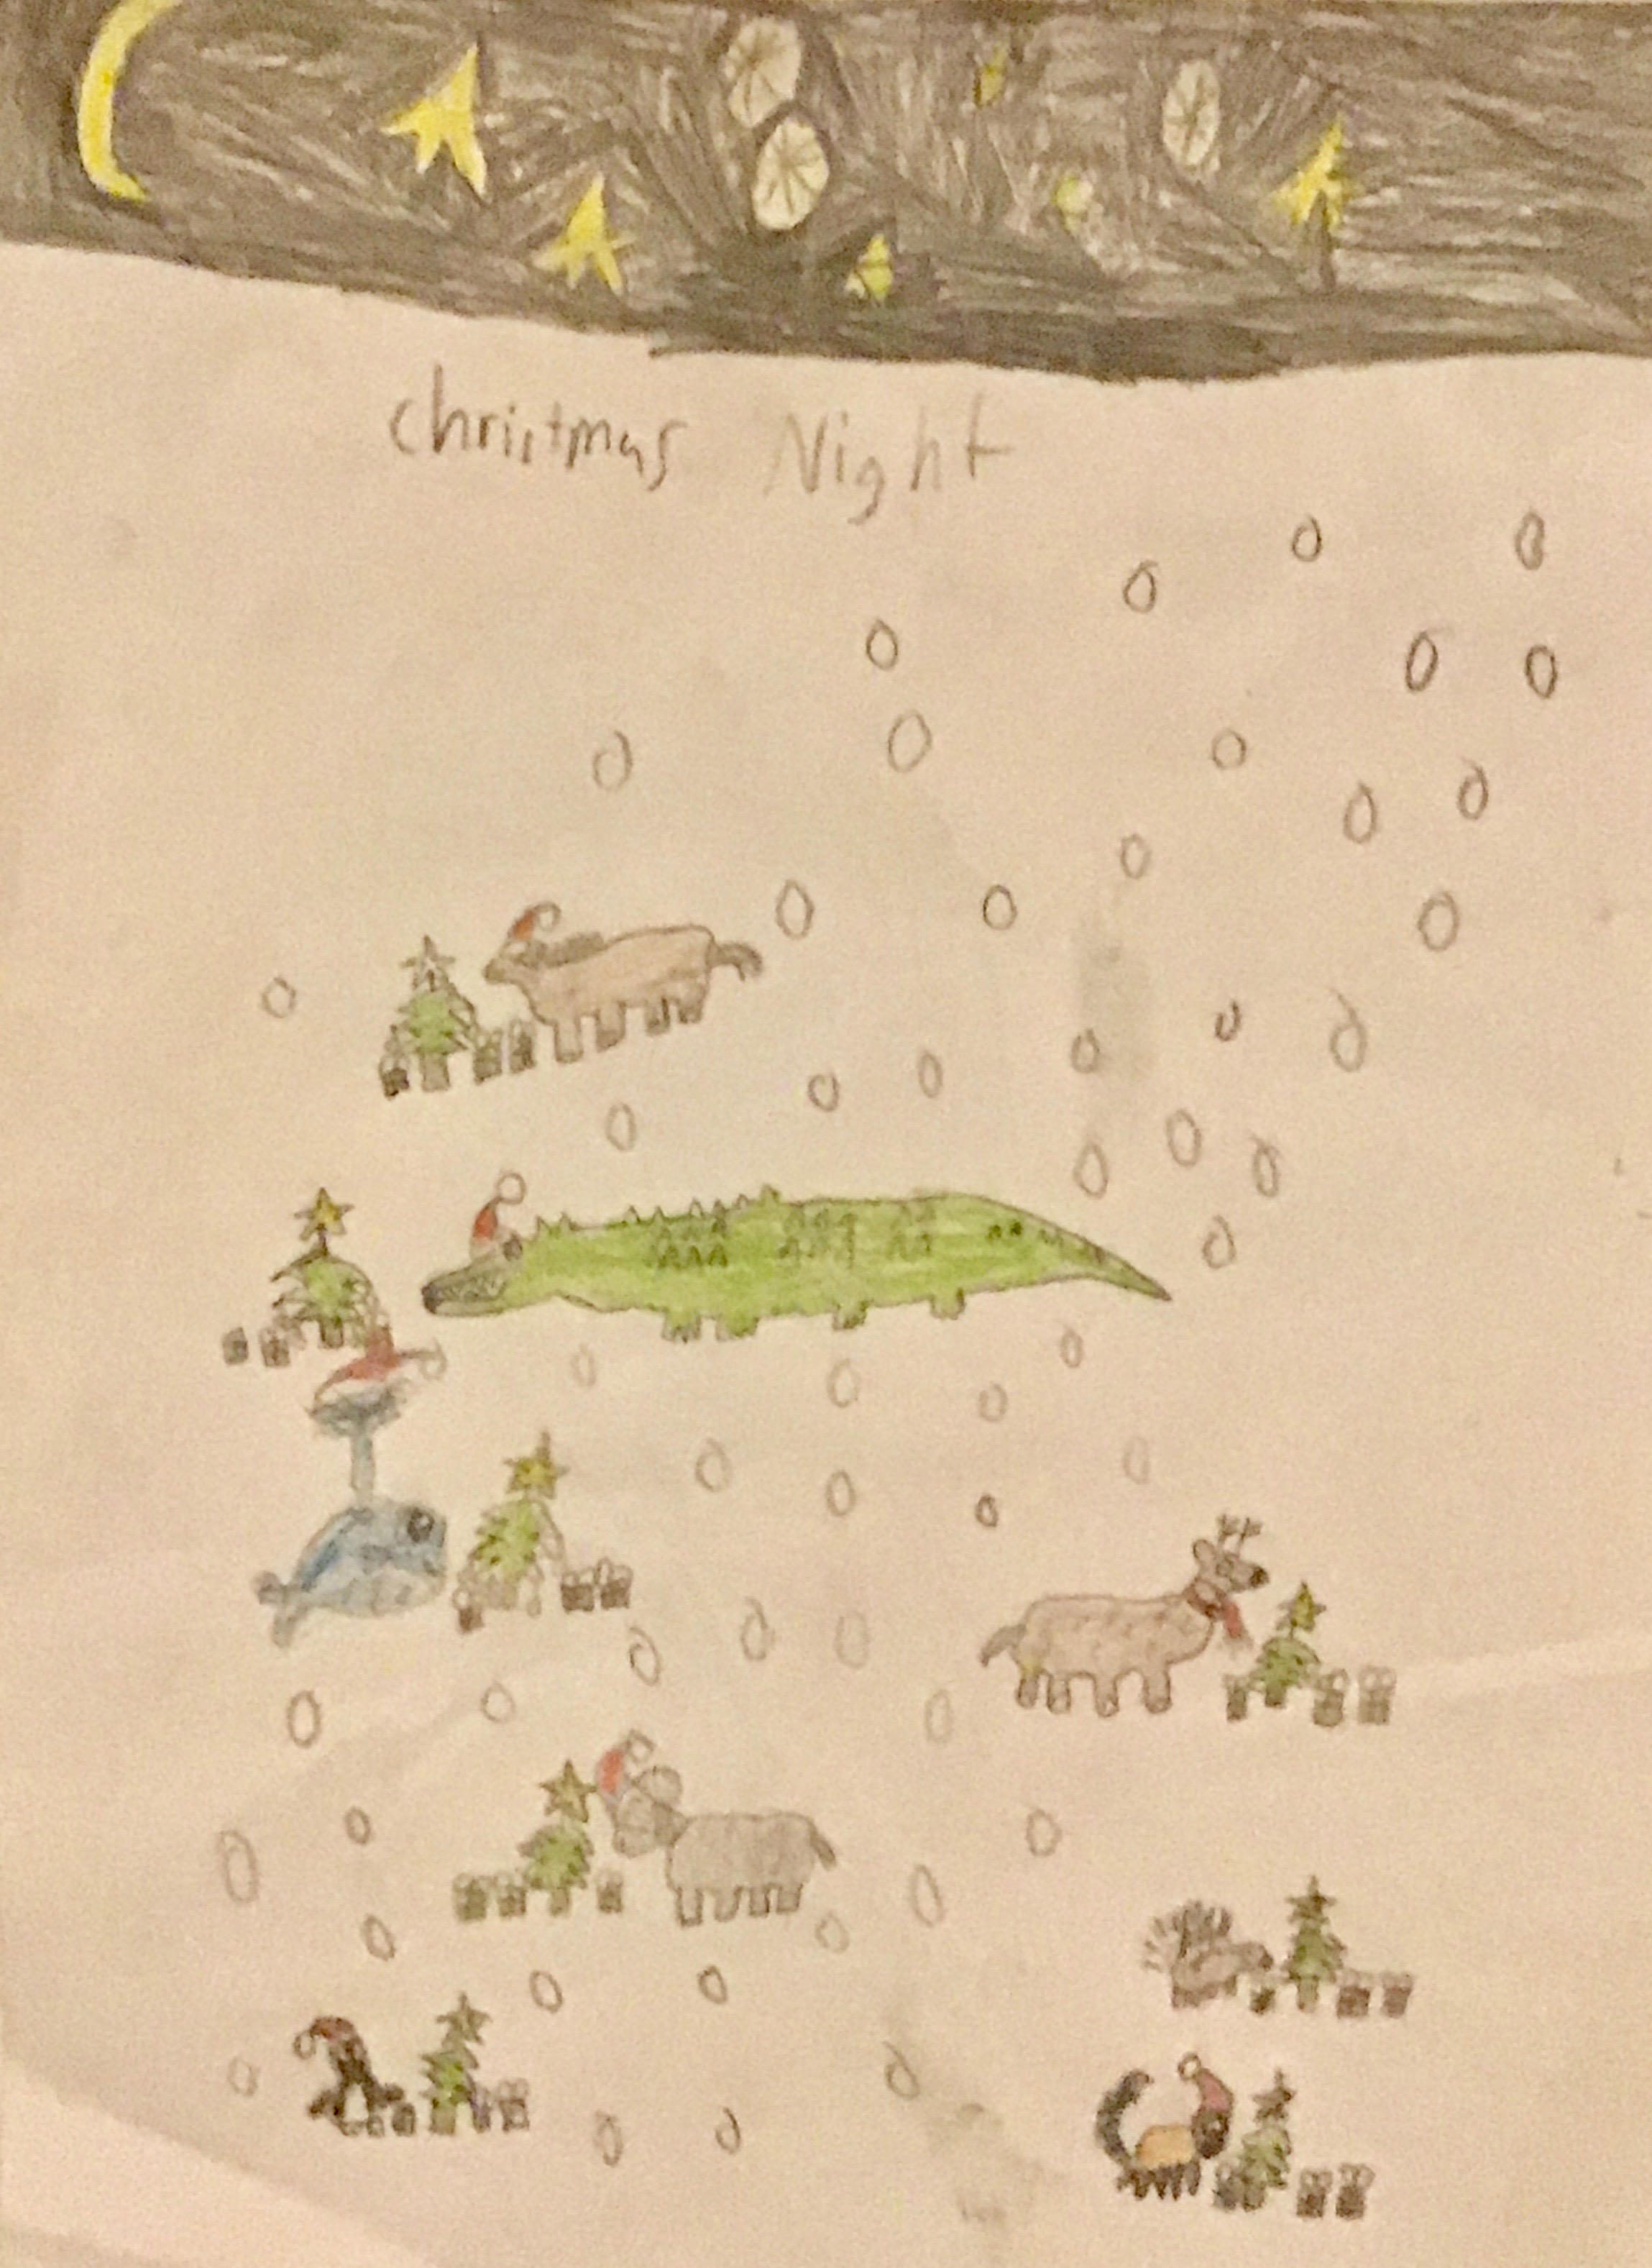 'Christmas night' by Ethan (8) from Dublin